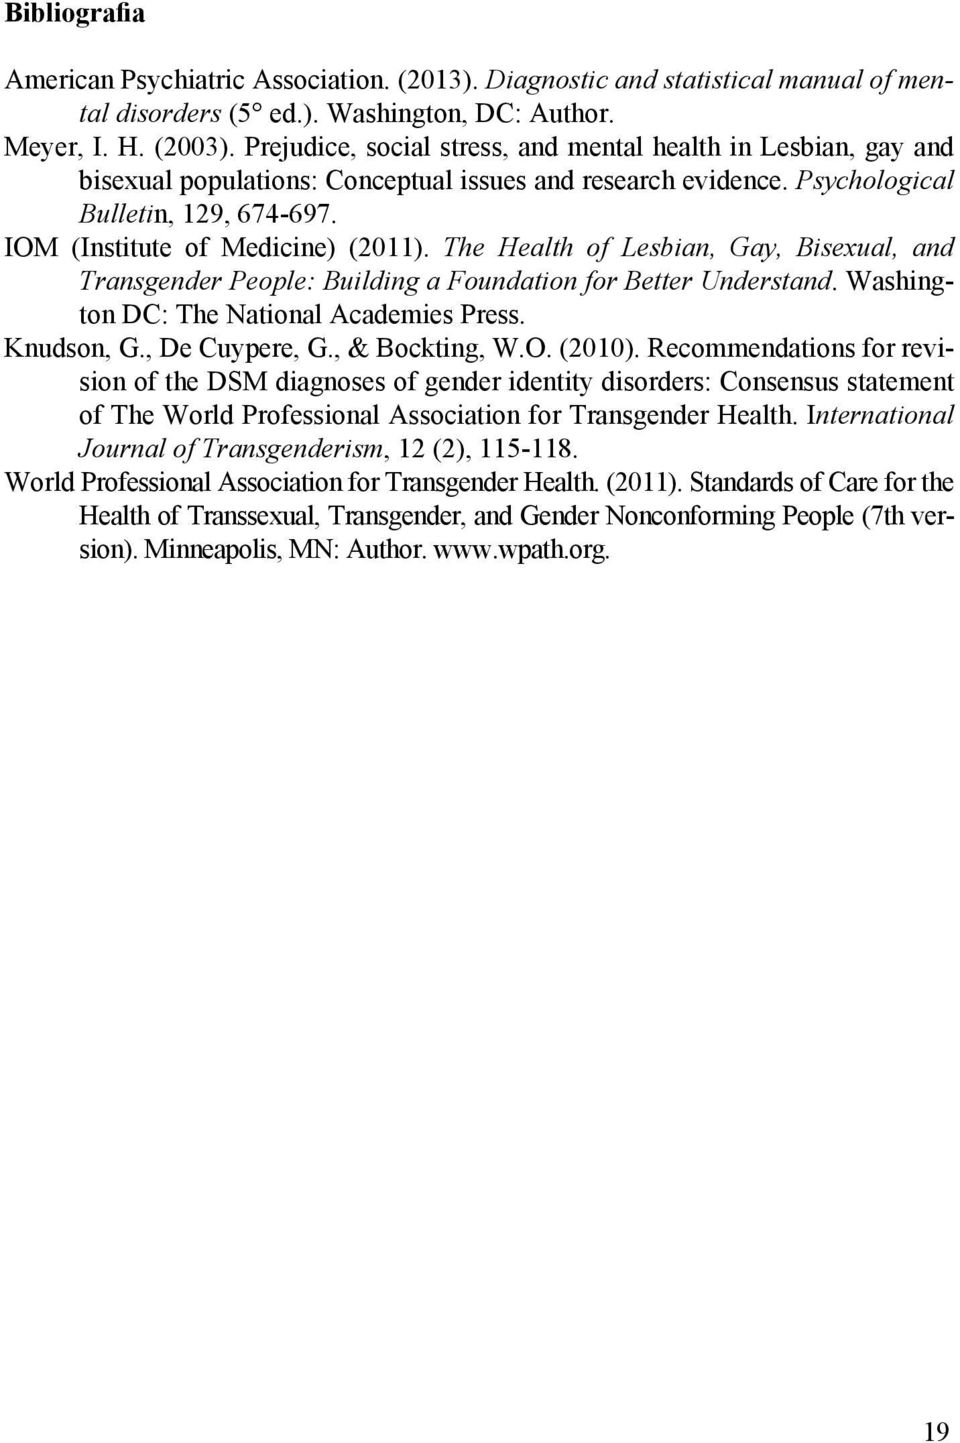 The Health of Lesbian, Gay, Bisexual, and Transgender People: Building a Foundation for Better Understand. Washington DC: The National Academies Press. Knudson, G., De Cuypere, G., & Bockting, W.O.